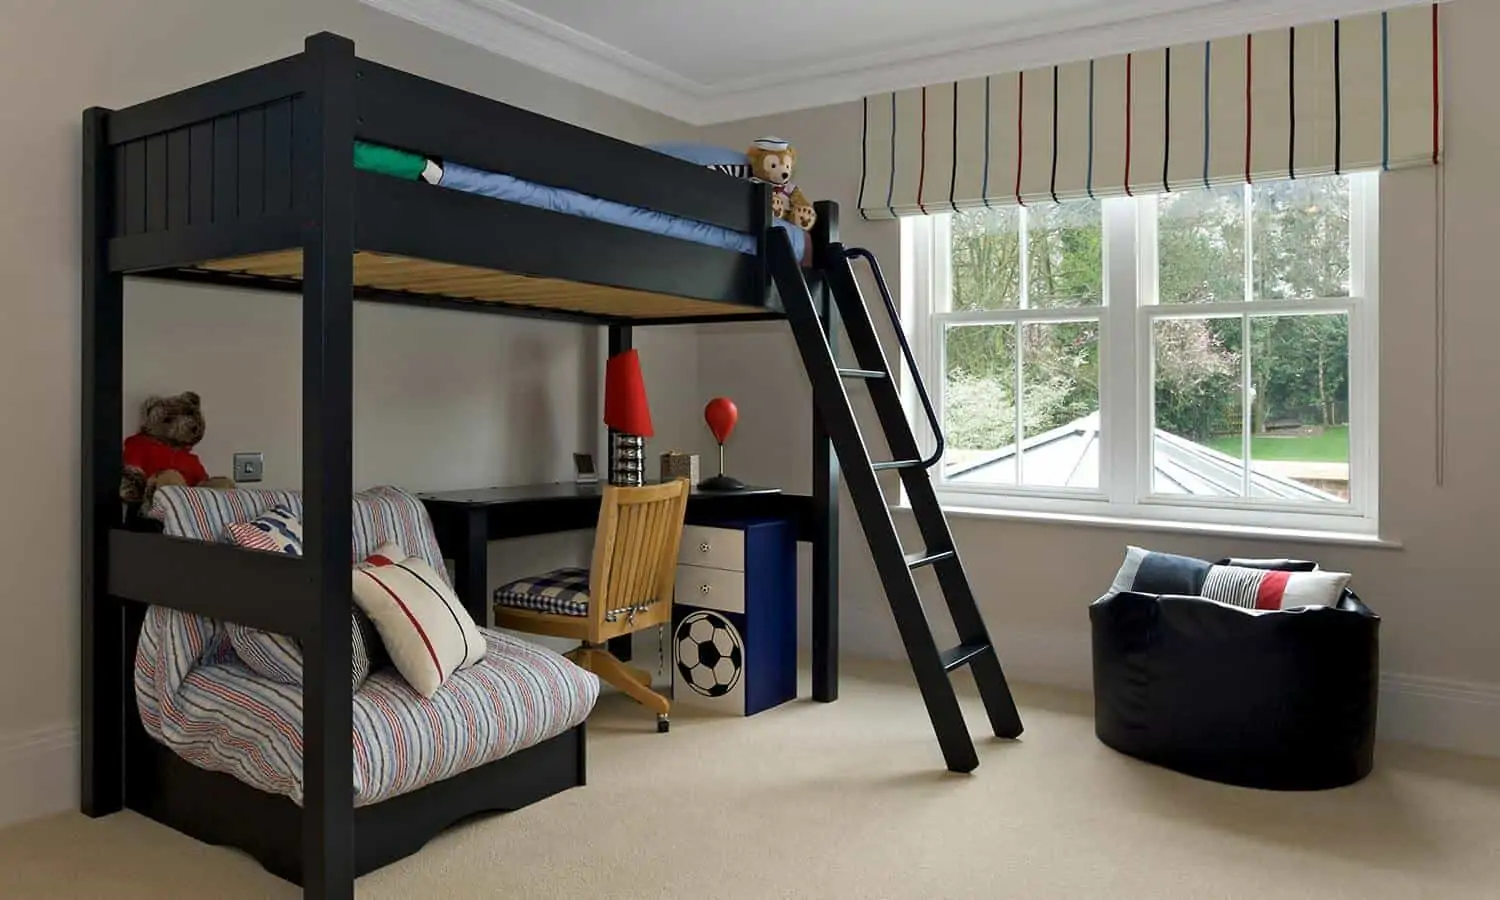  bunk beds for kids, space saving beds like futon